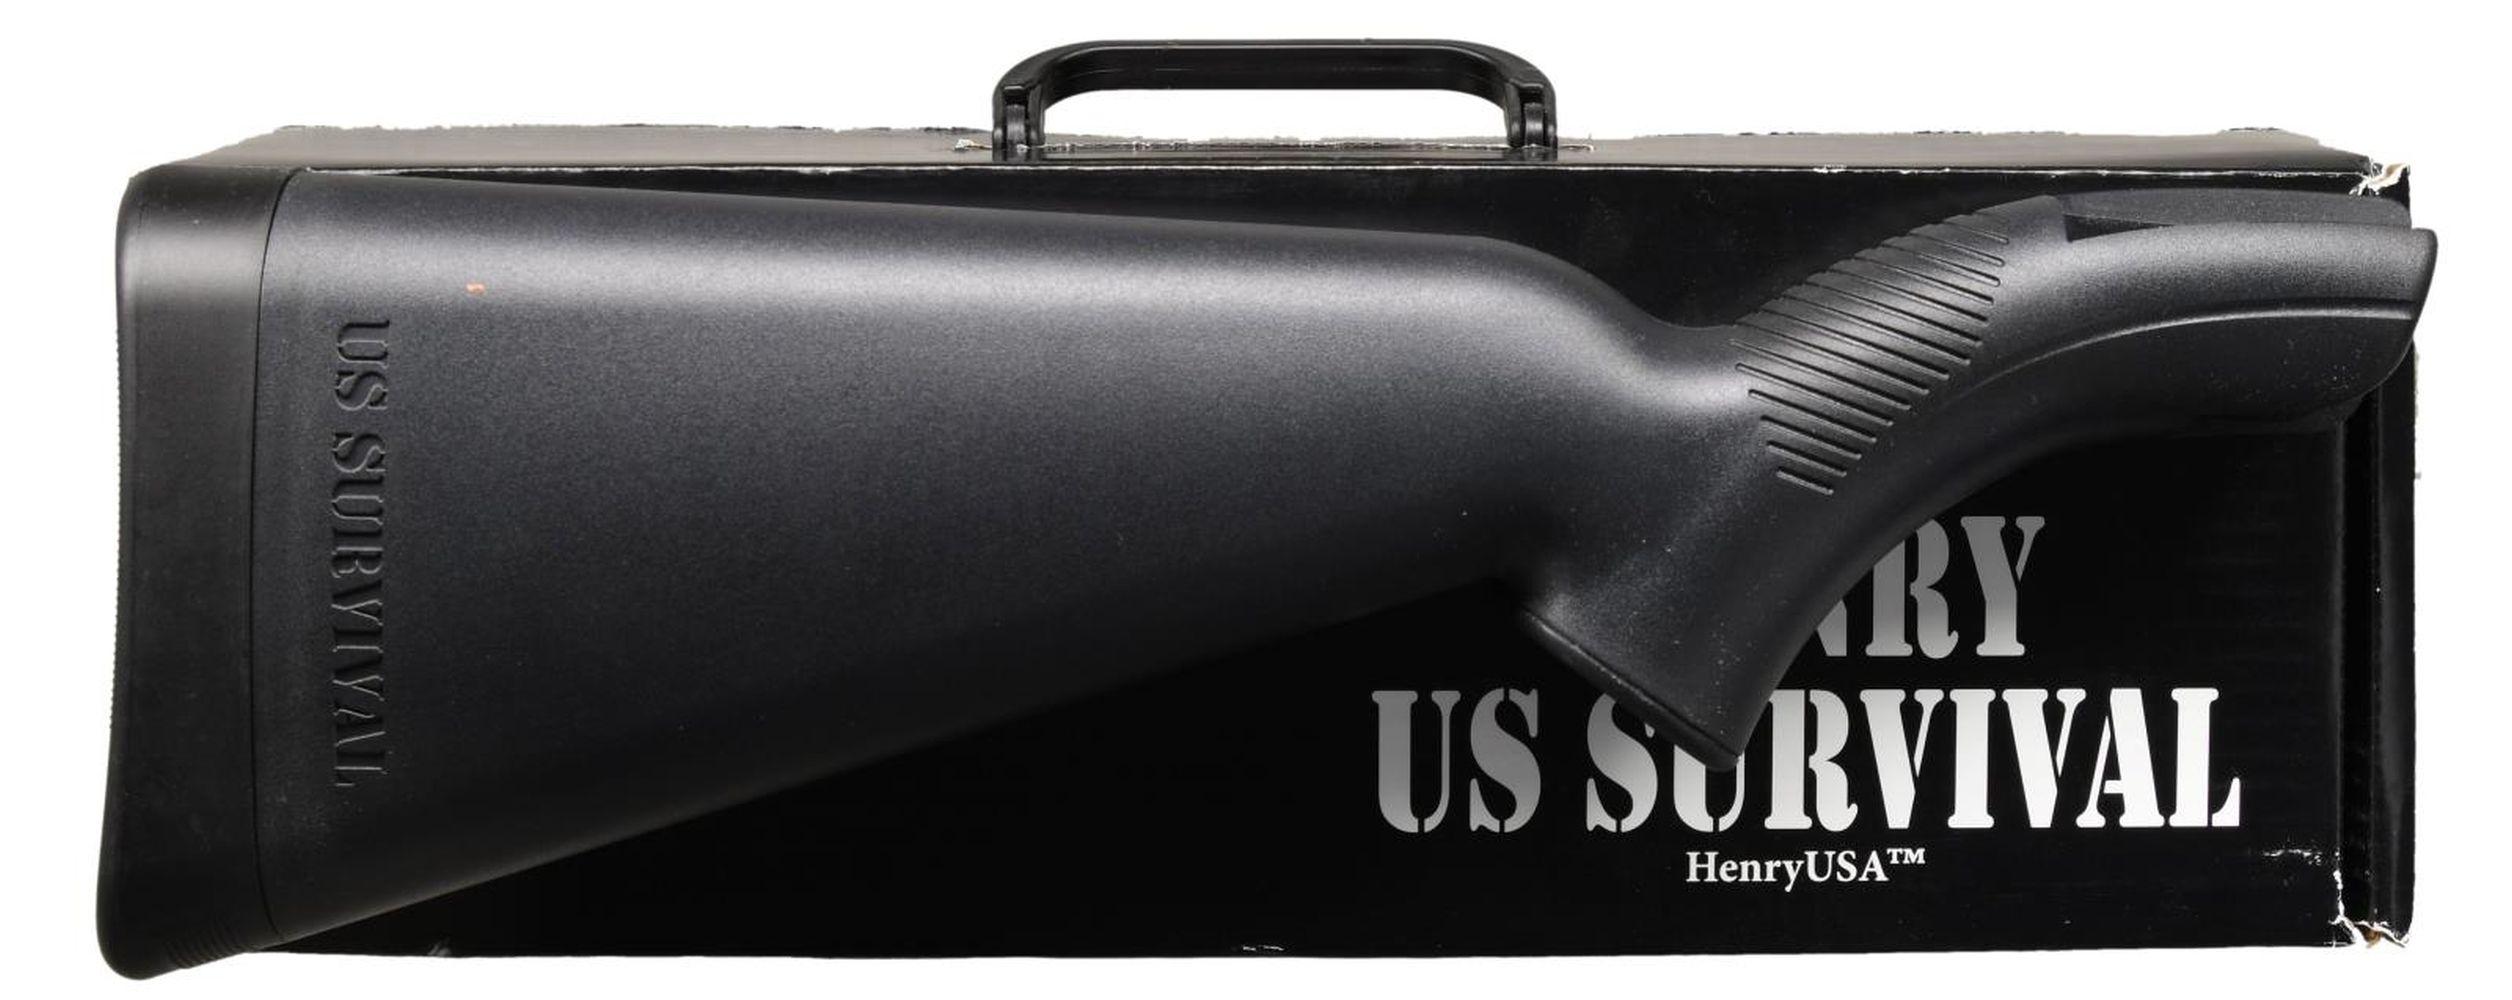 HENRY REPEATING ARMS MODEL H002B SEMI-AUTOMATIC US